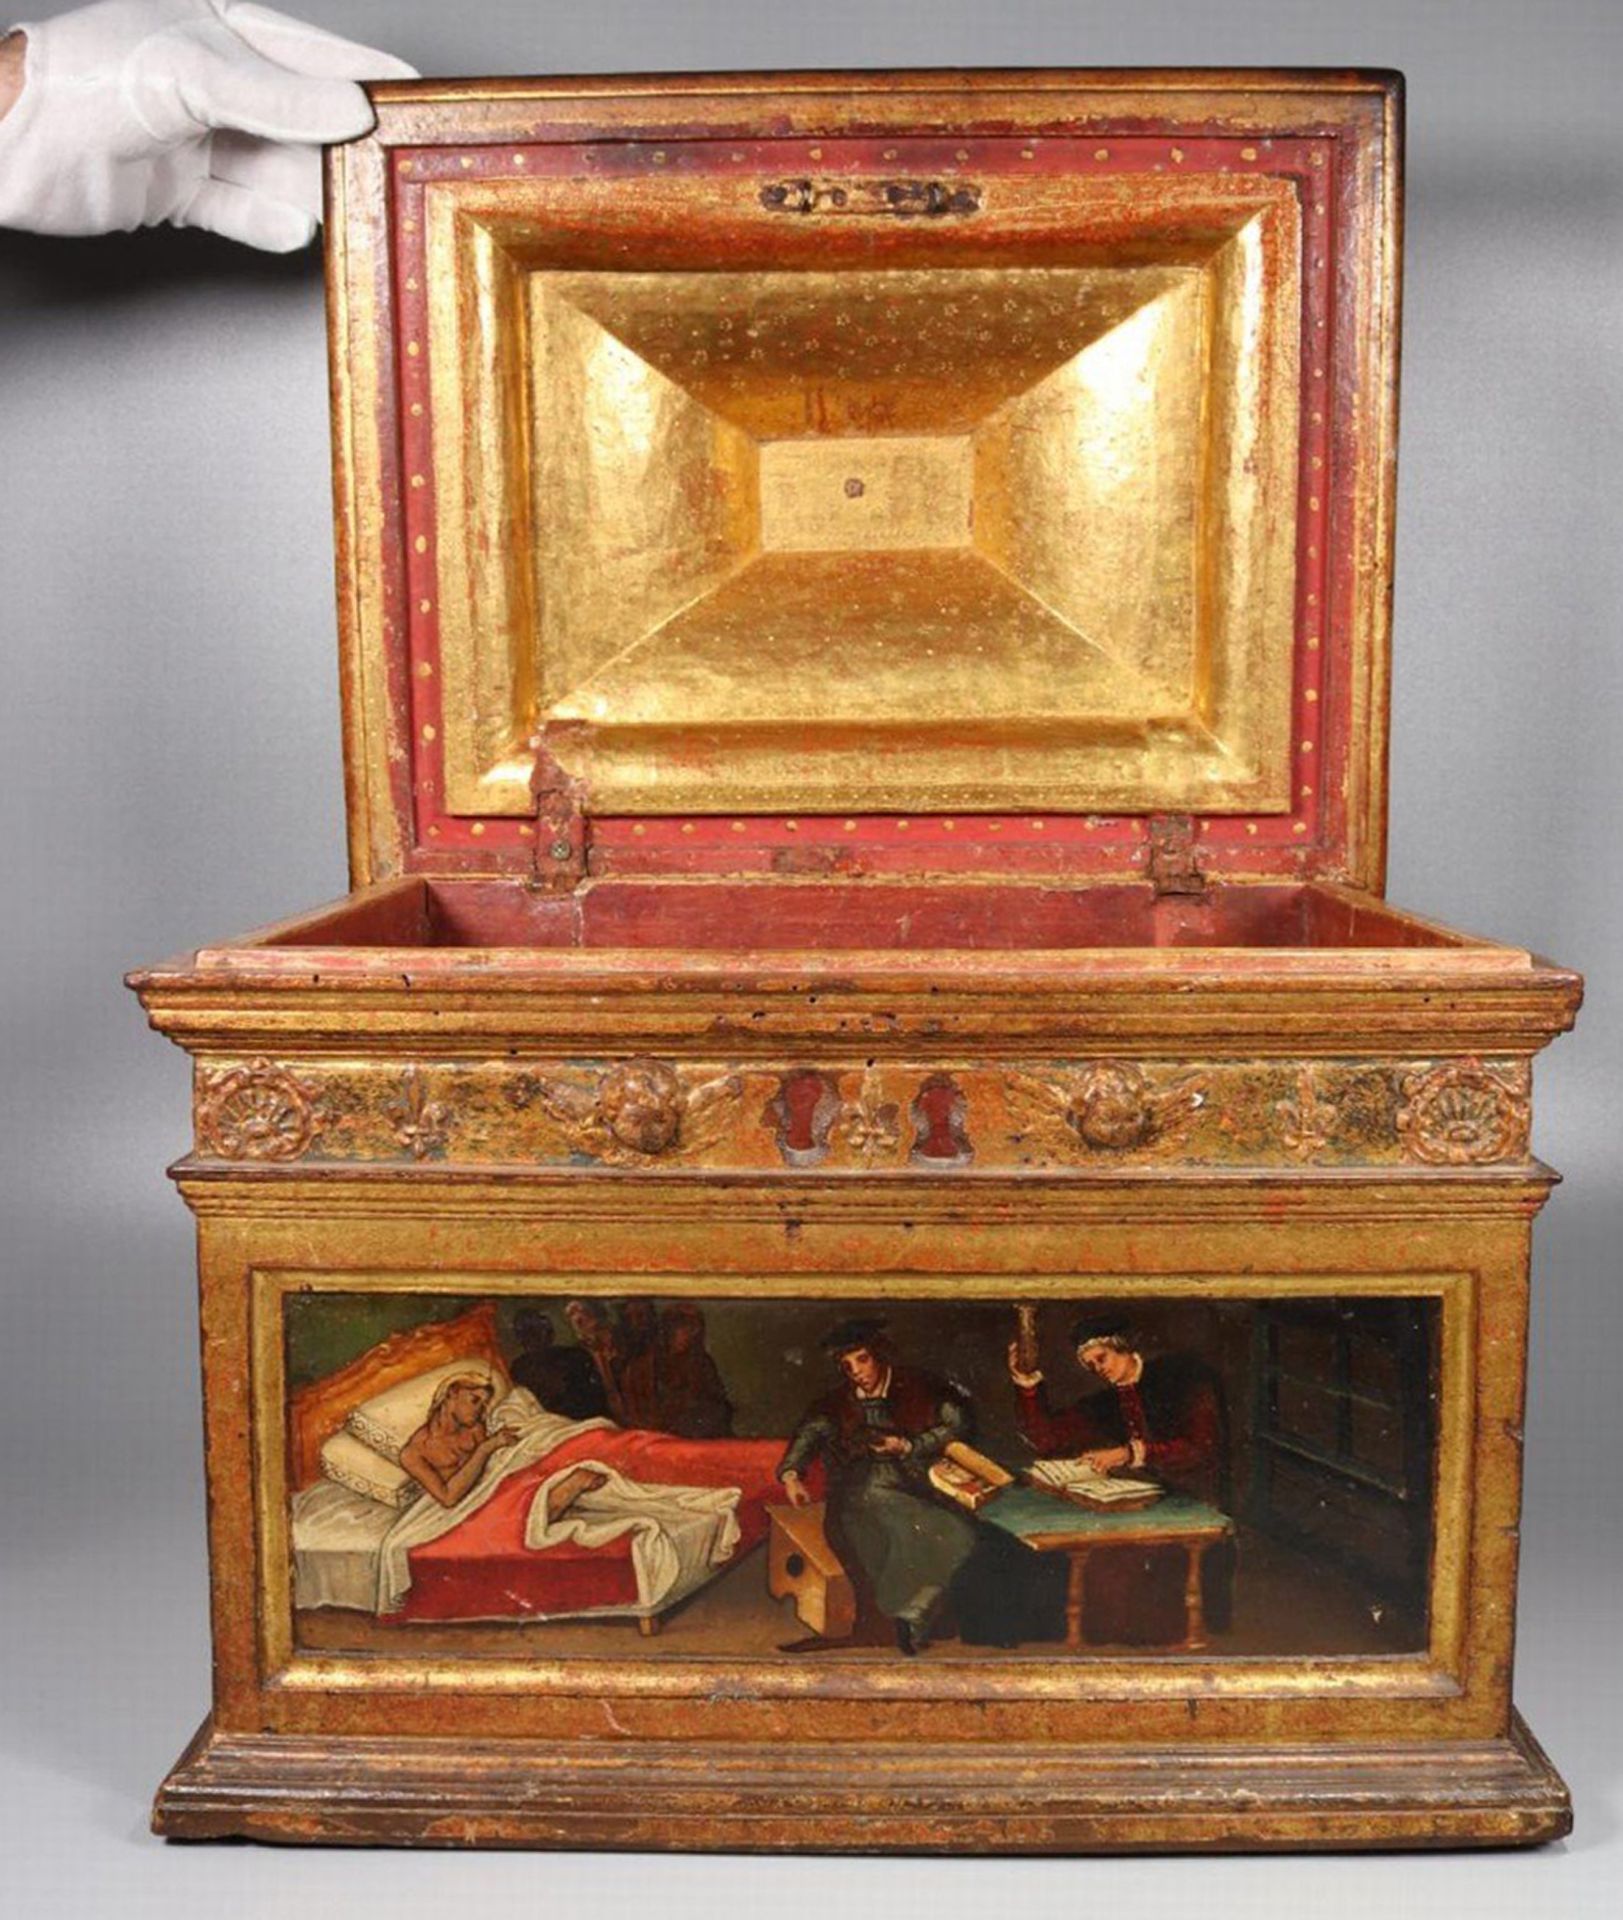 Rare Italian Medical Chest of the Renaissance, Milan or Vizcaya, made by the house of Medinaceli, he